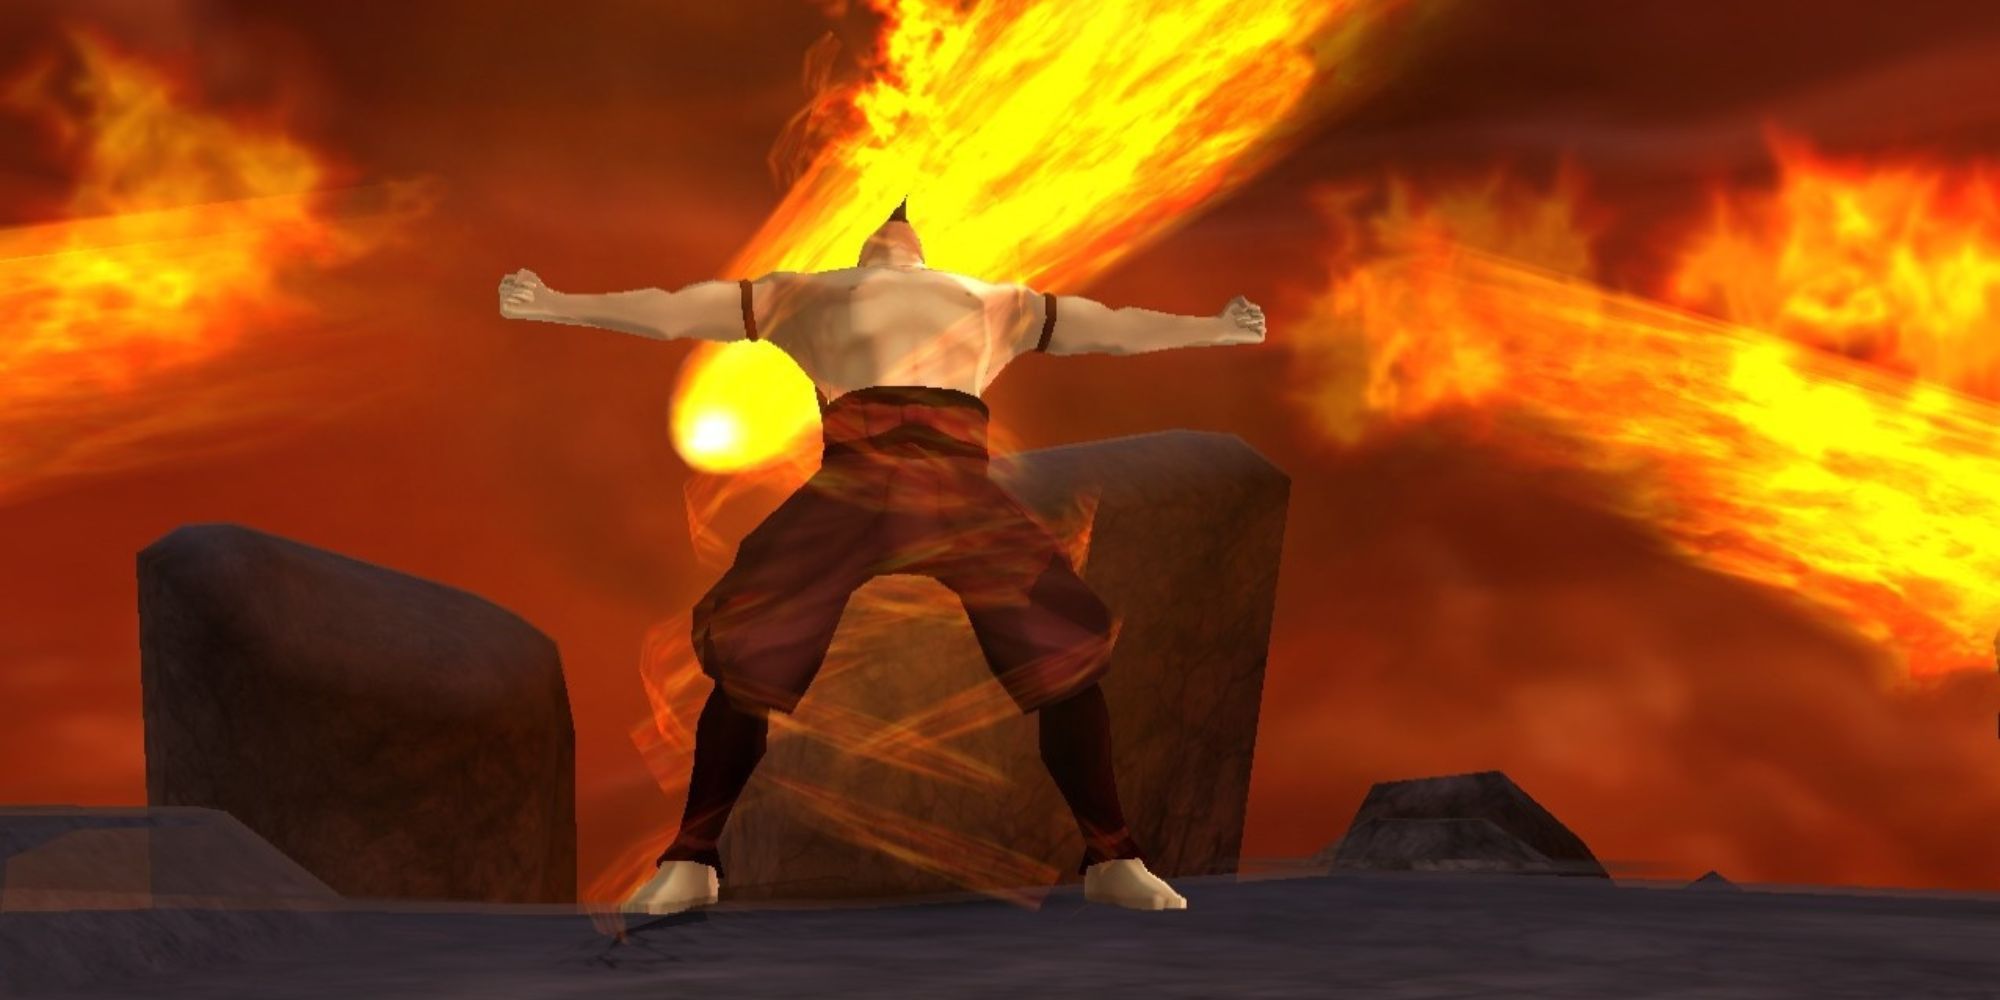 Ozai stands with arms outstretched as flames shoot out around him